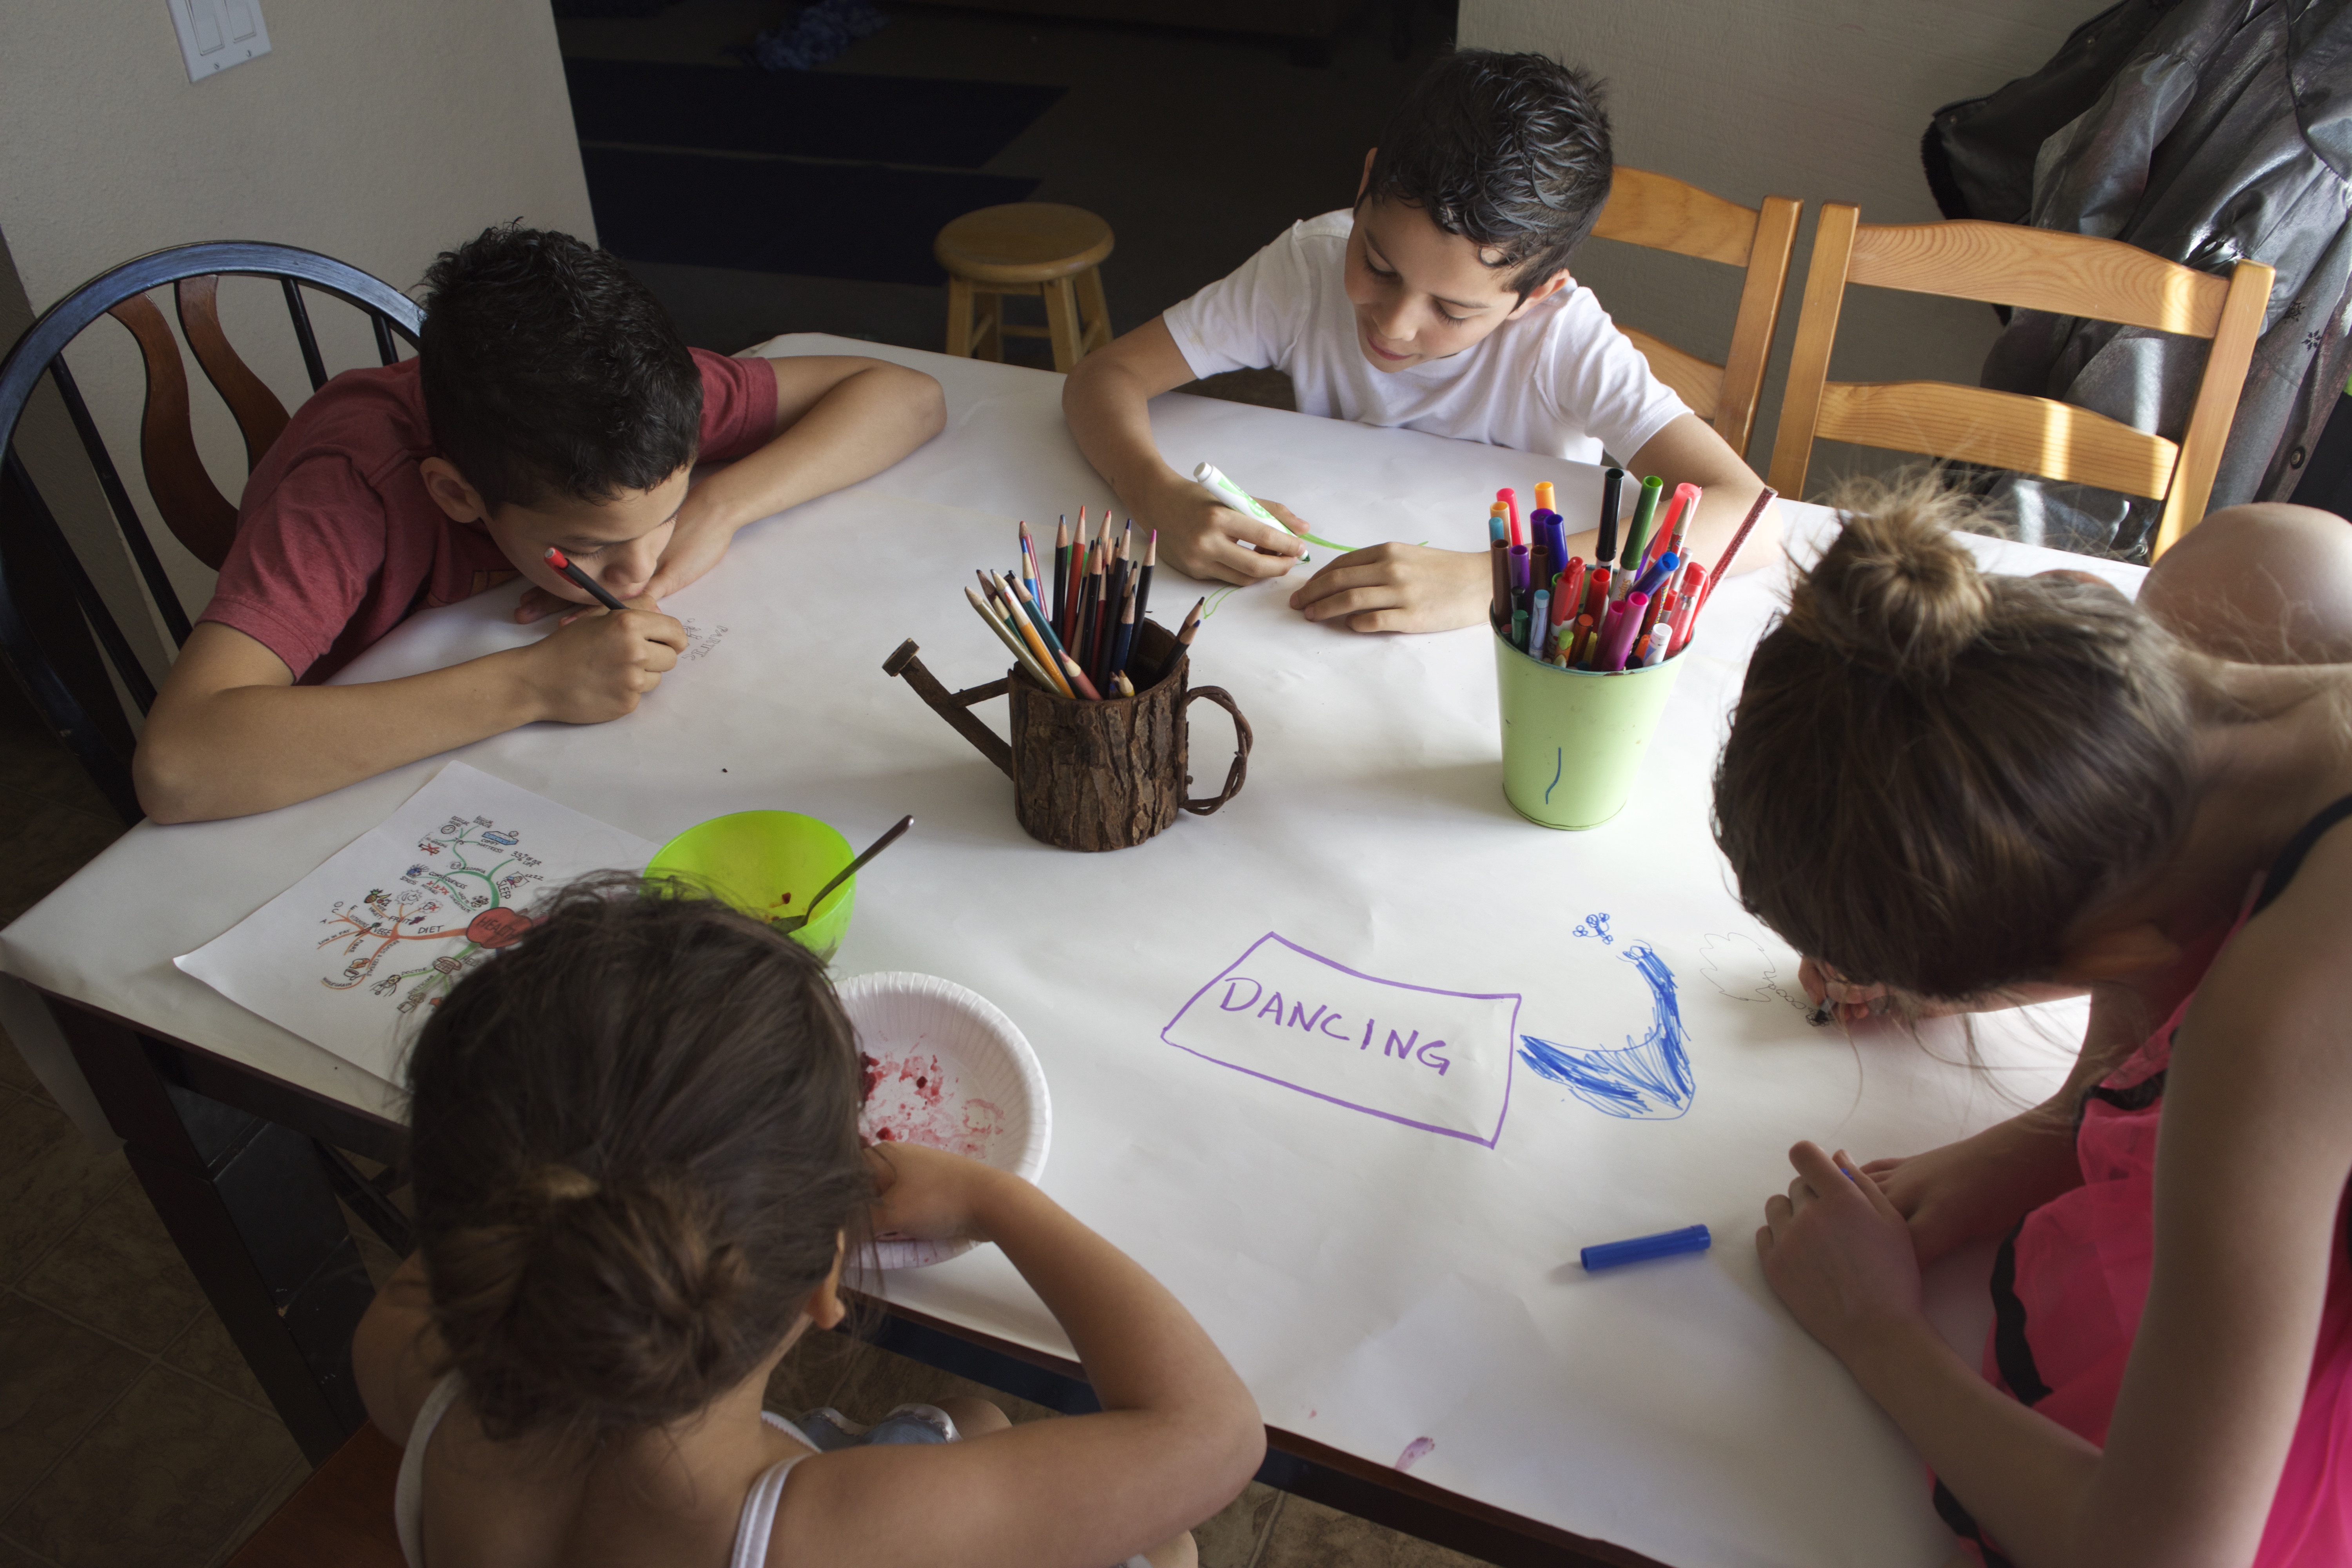 Mind mapping is a creative way to look at and organize ideas, and all ages can do it!